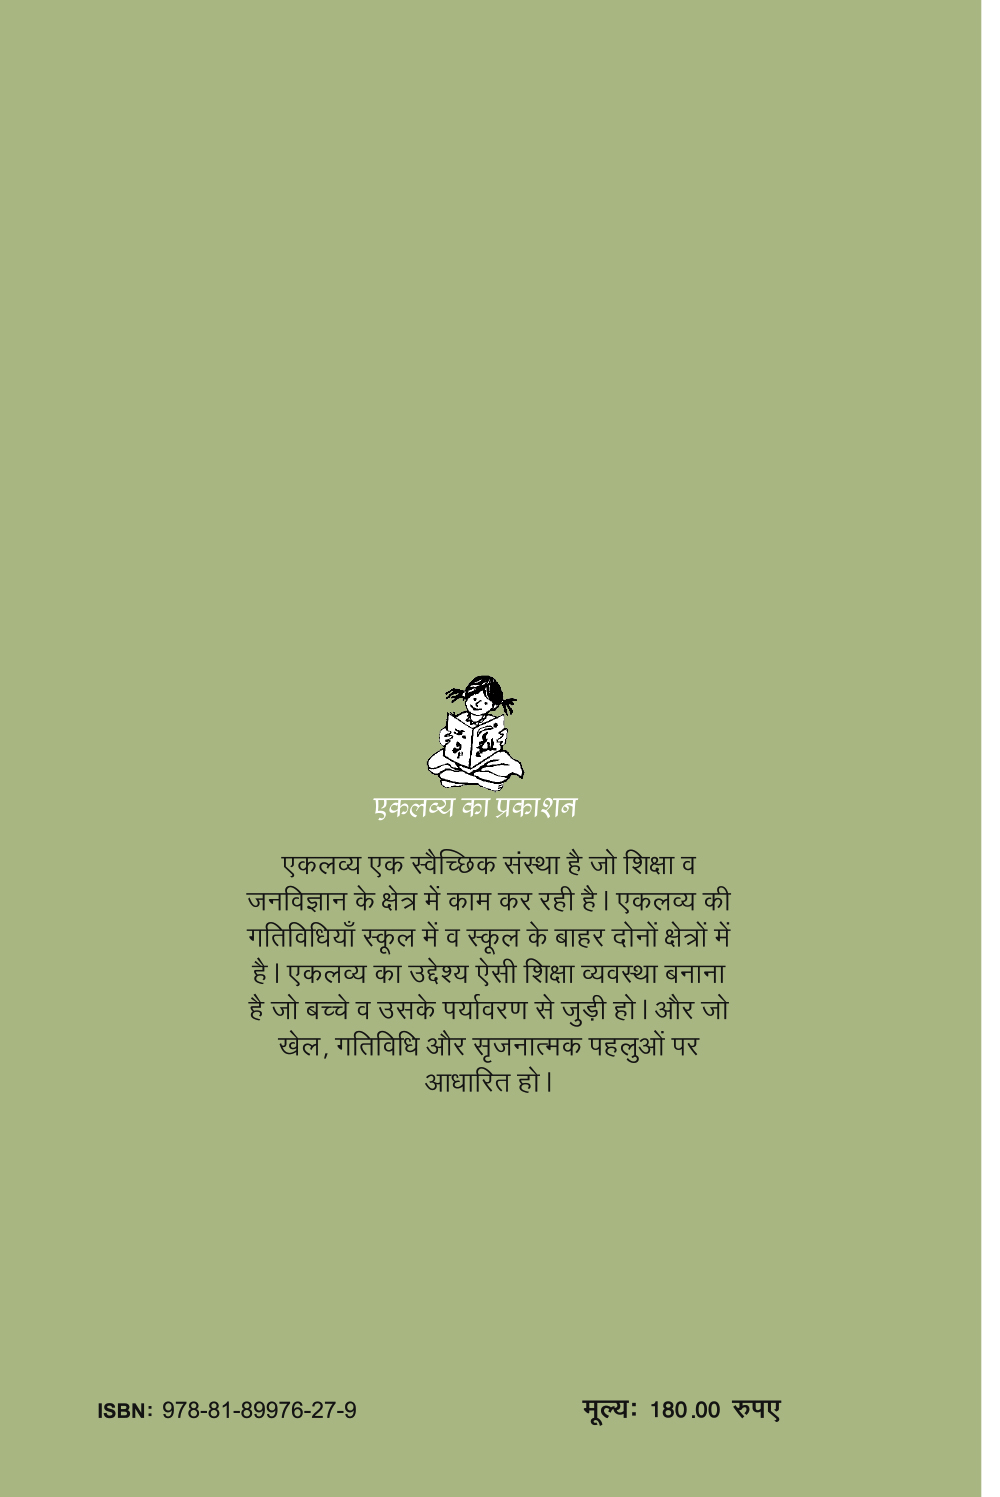 Dublee Cheenti Sabse Aage Thi (A Diary for children)